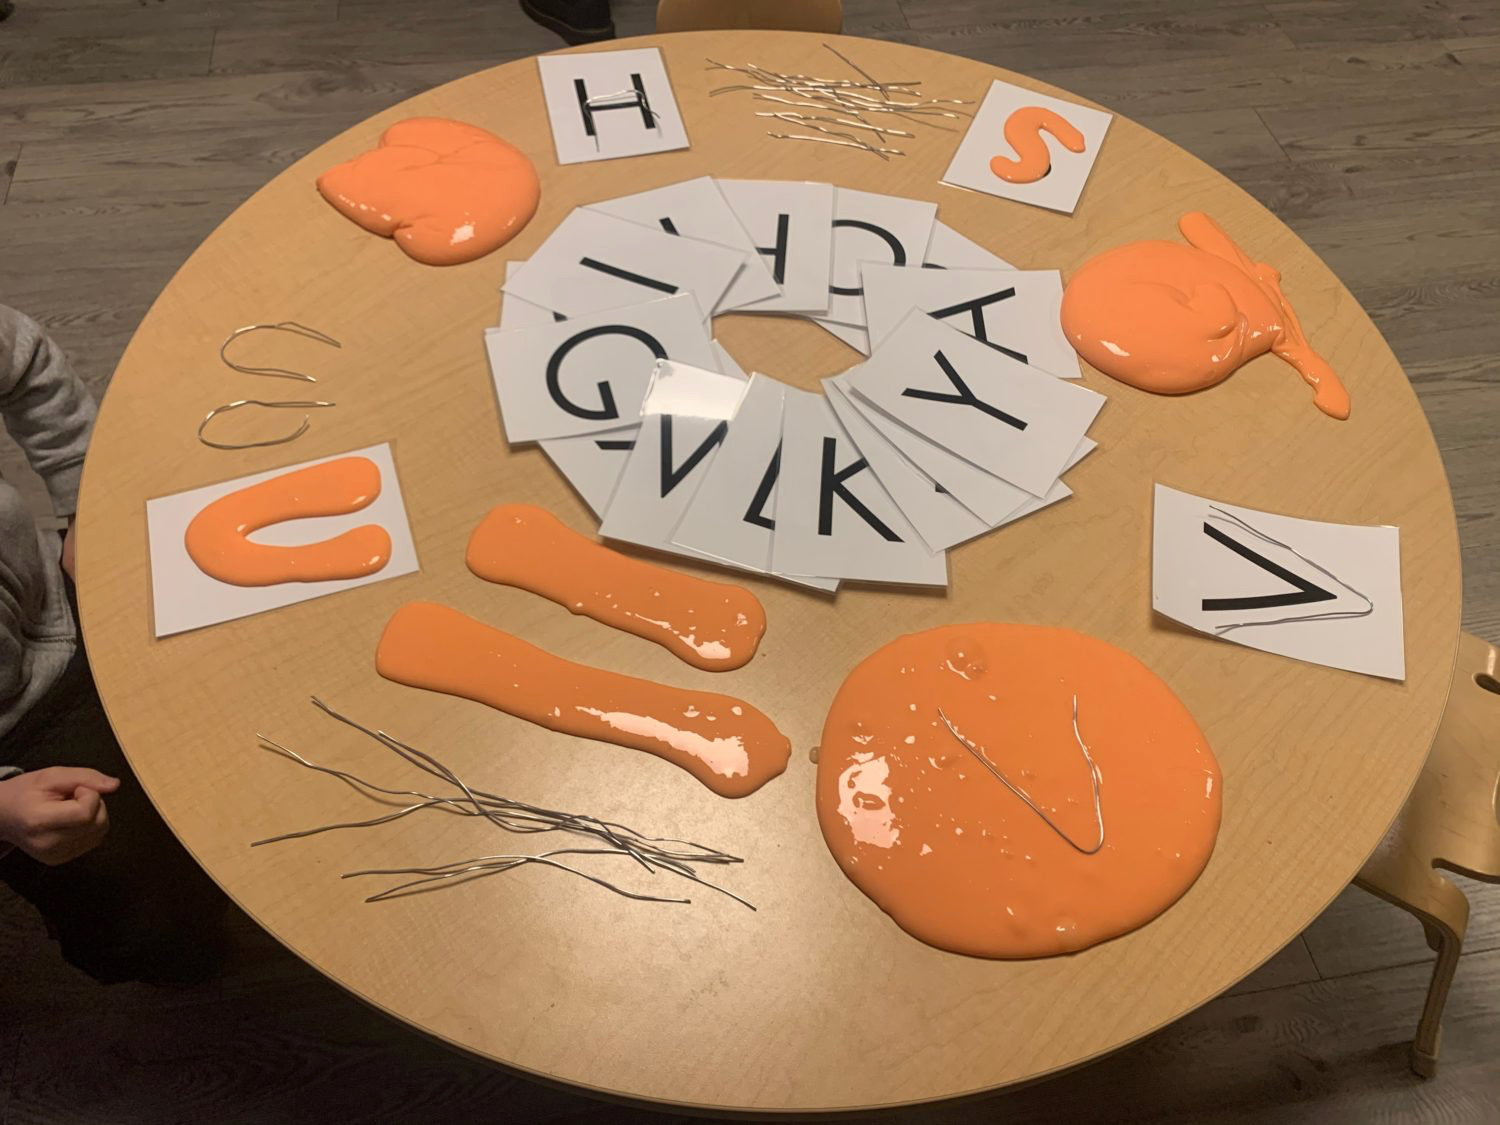 gak on table with letters